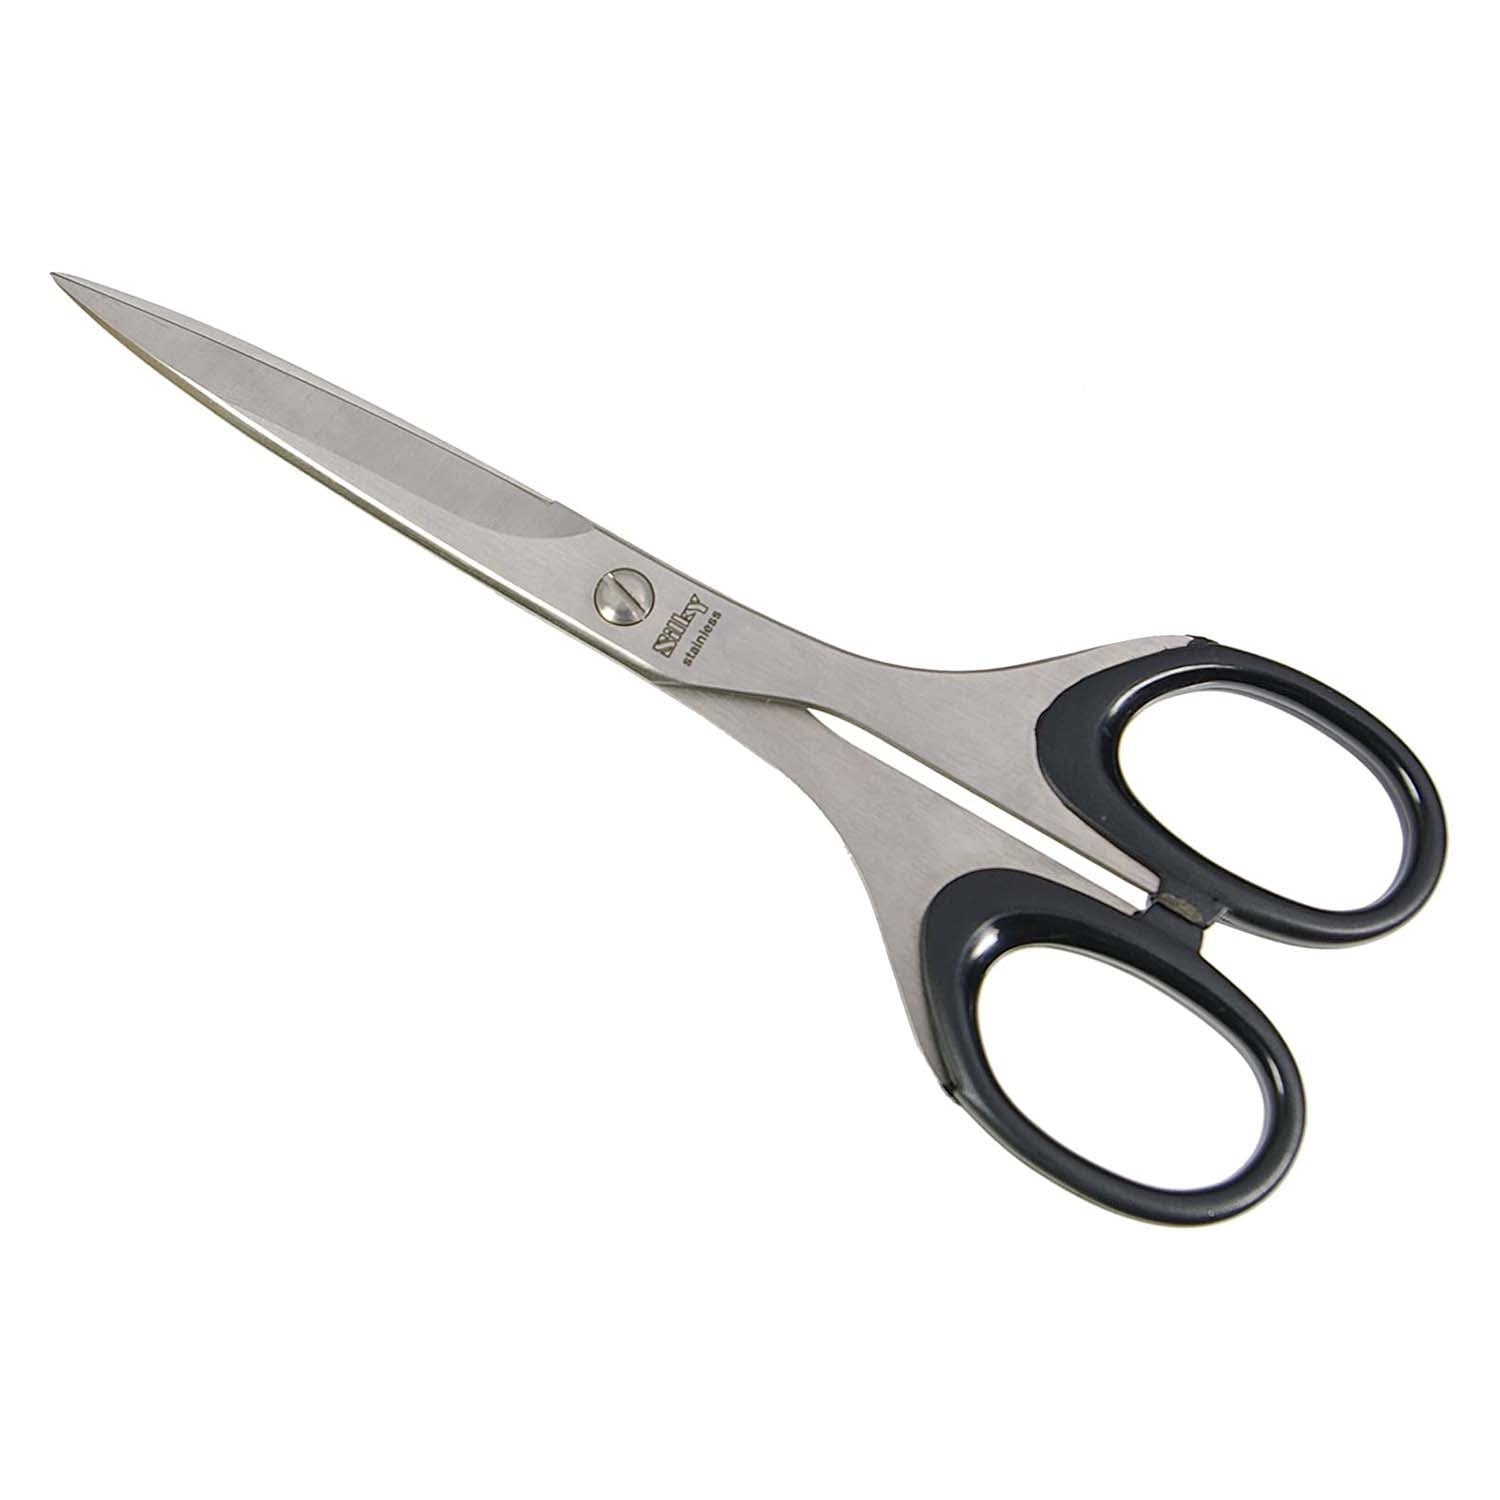 Seki Japan Japanese Multipurpose Scissors, 3.5 inch Fluorine Coating Stainless Steel Blade Office Shears for Cutting Paper Craft Fabric Photos